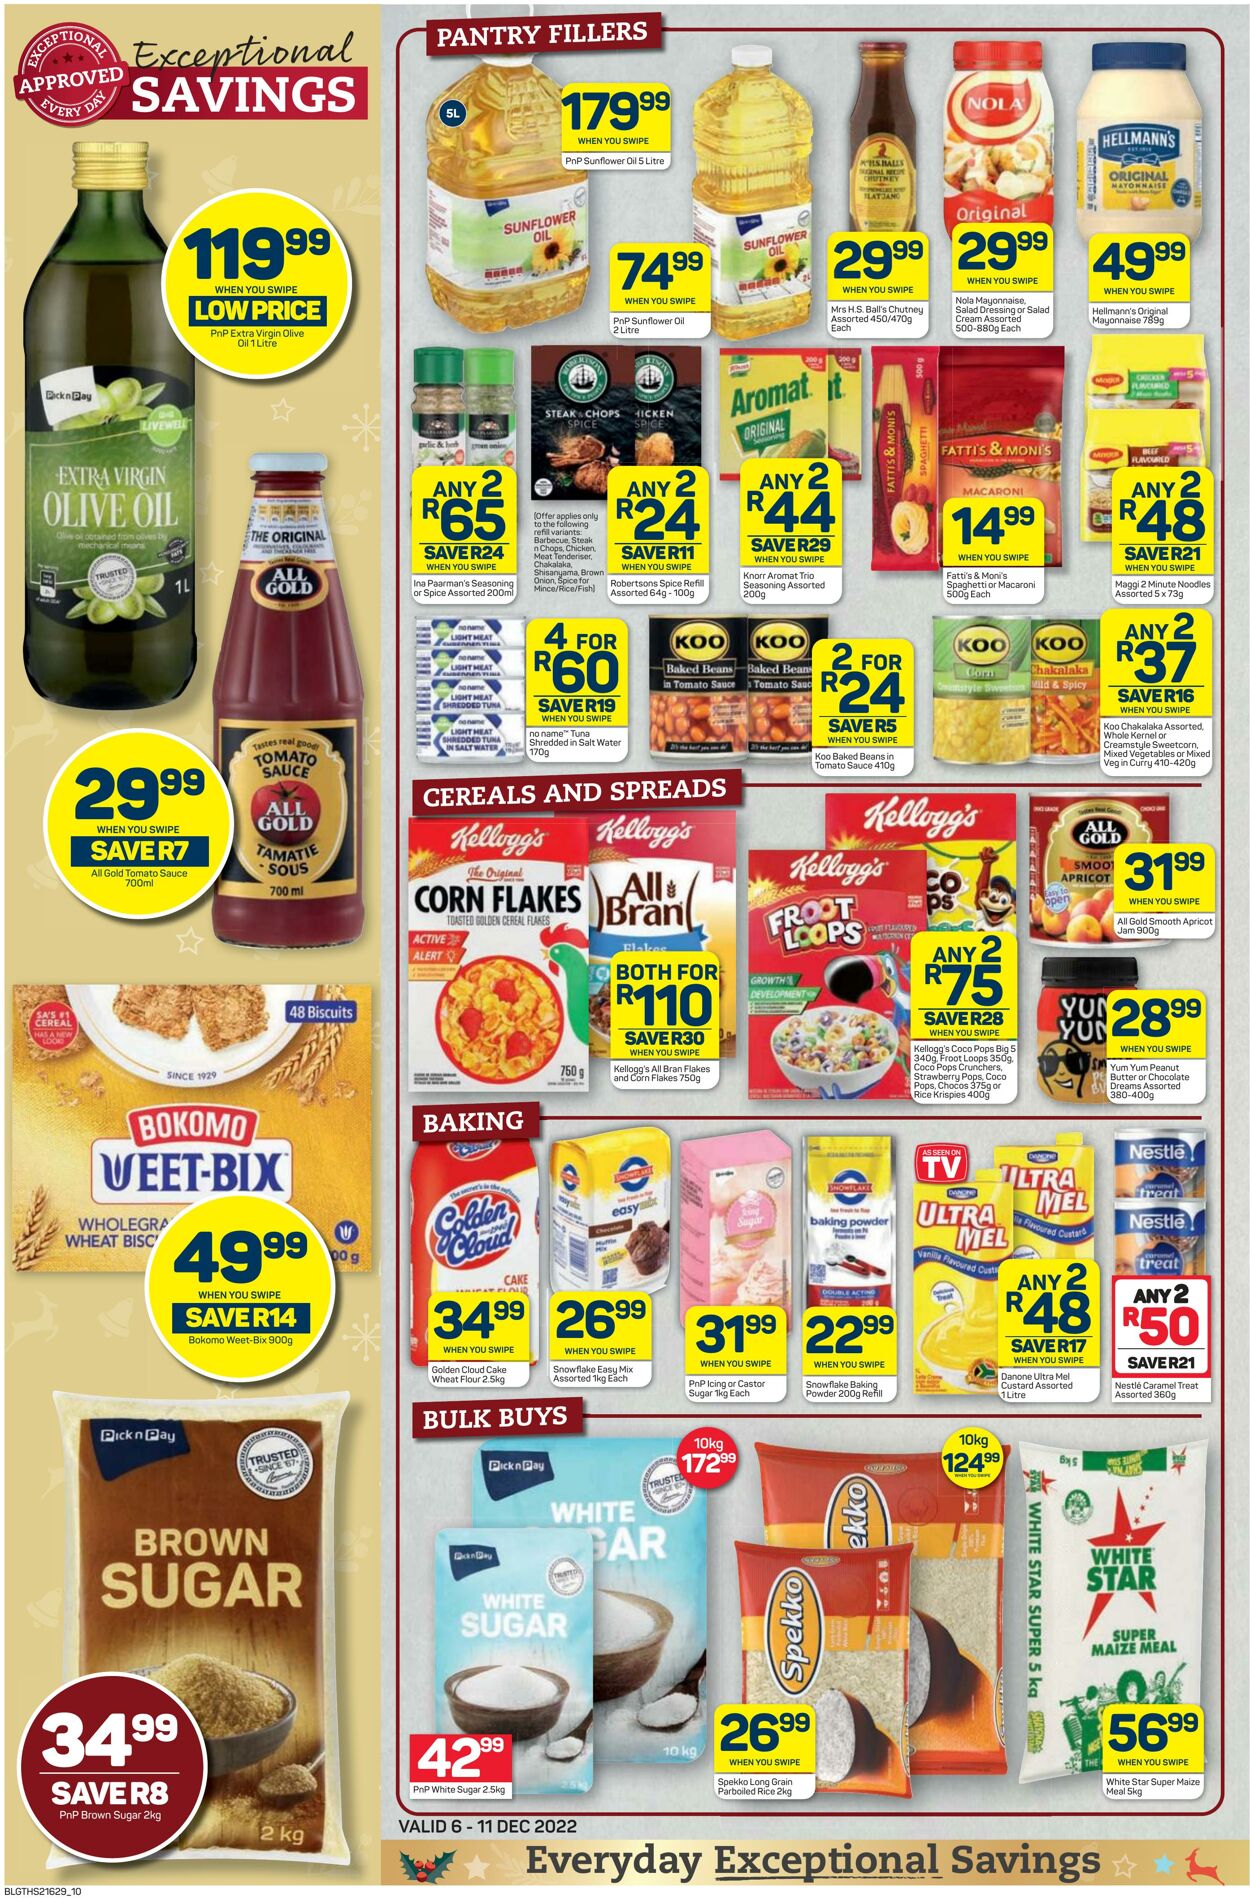 Special Pick n Pay 06.12.2022 - 11.12.2022